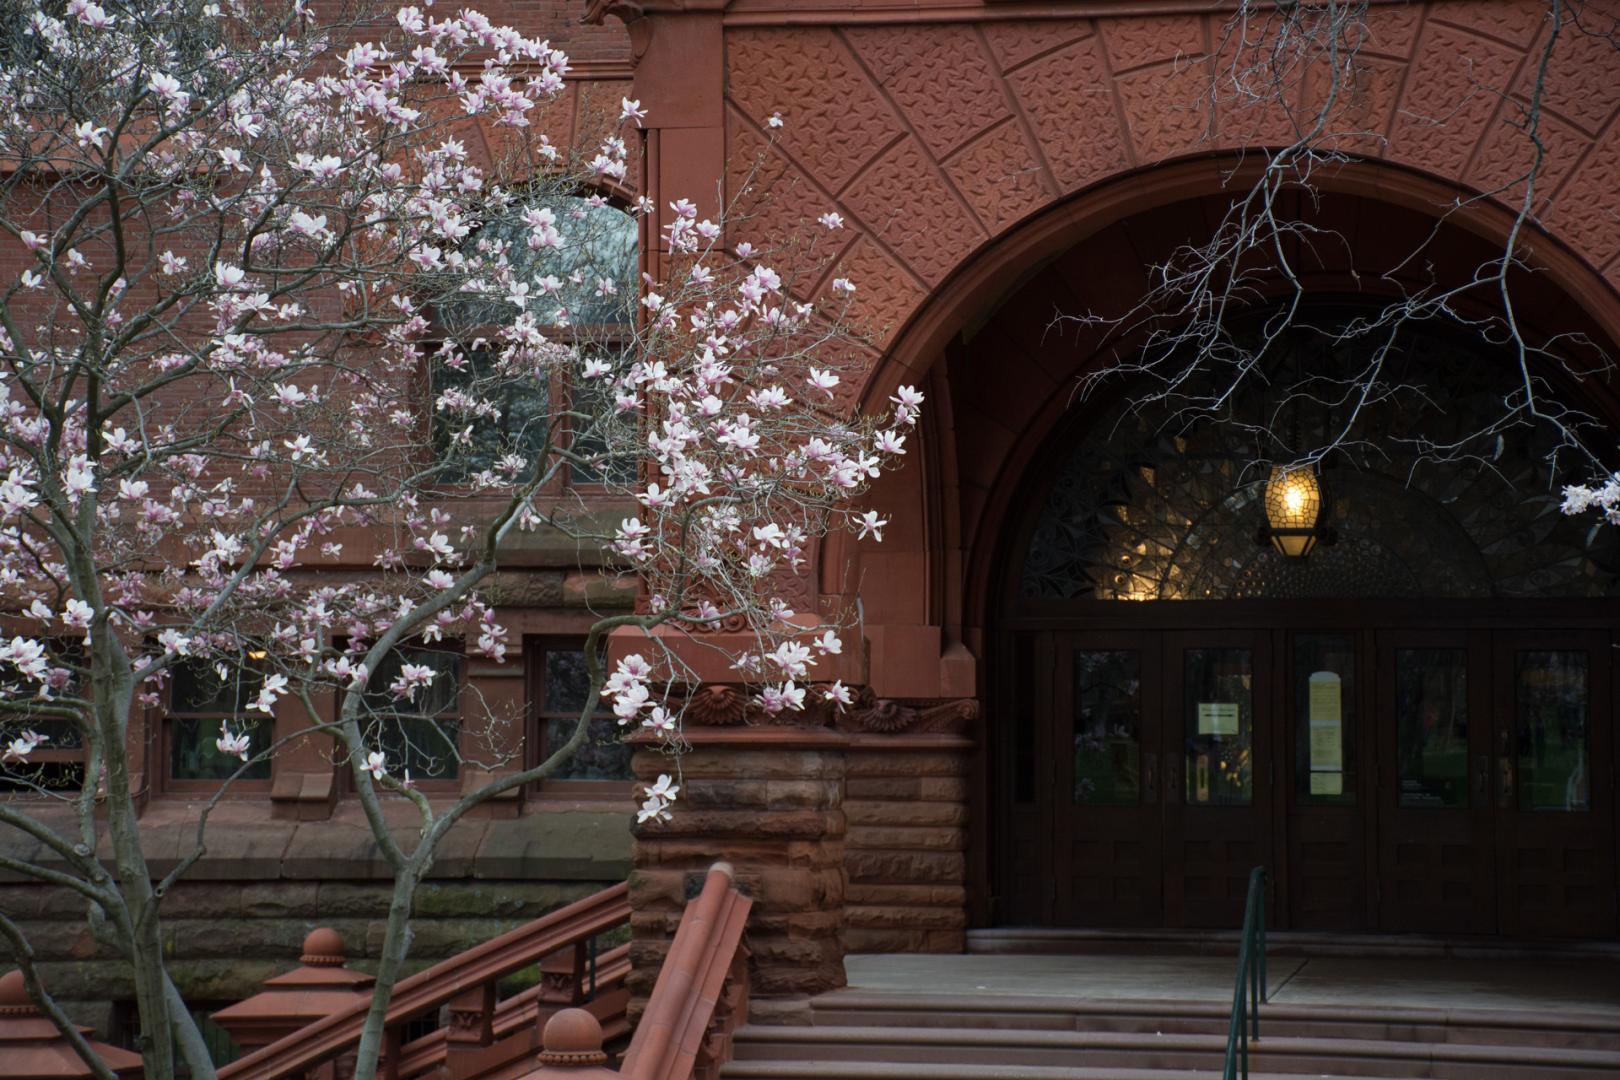 Entrance to Fisher Fine Arts Library